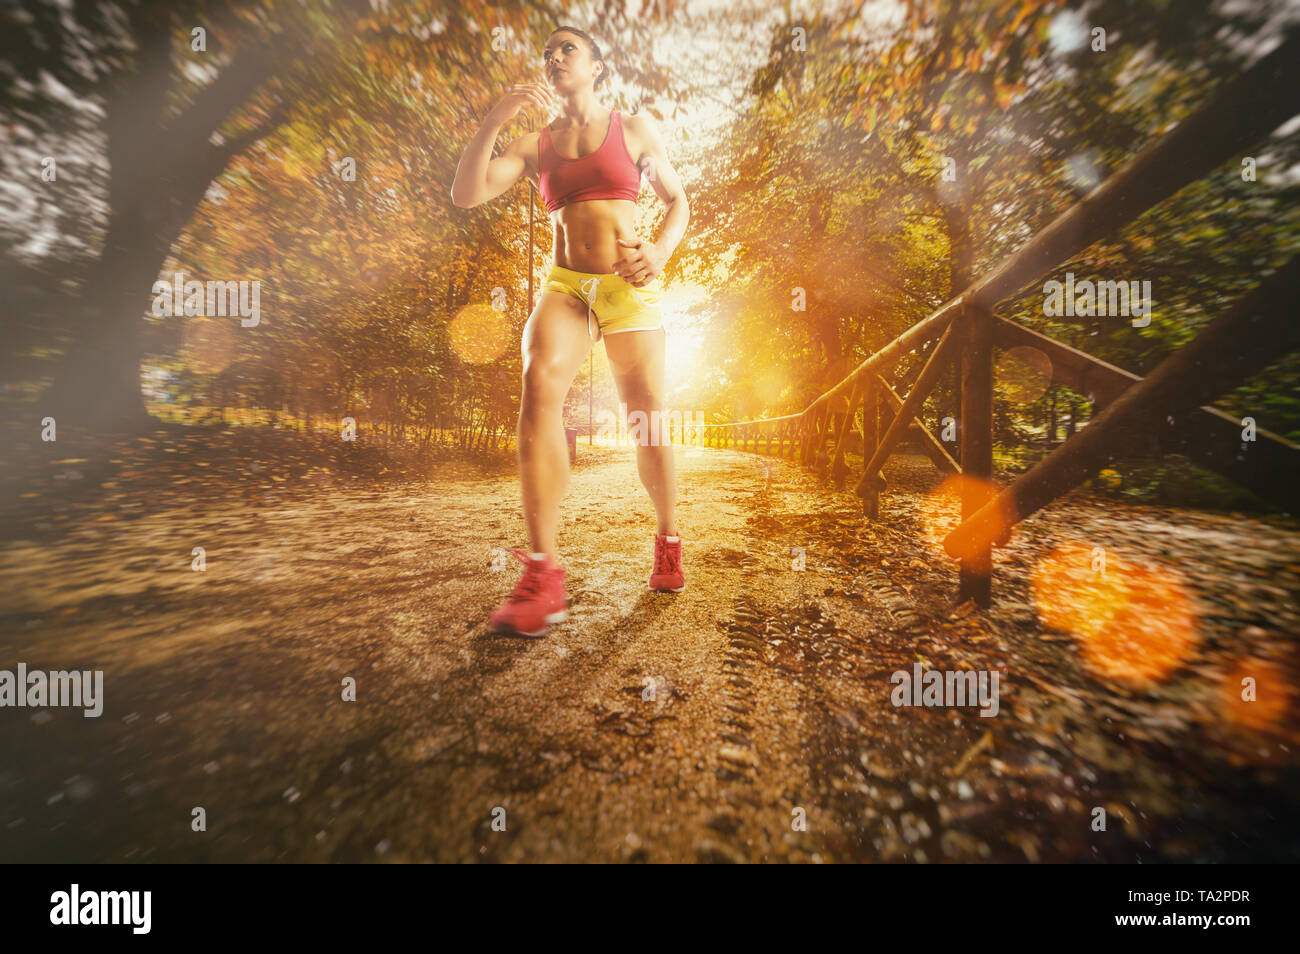 Outdoor jogging surrounded by nature for a healthy lifestyle Stock Photo